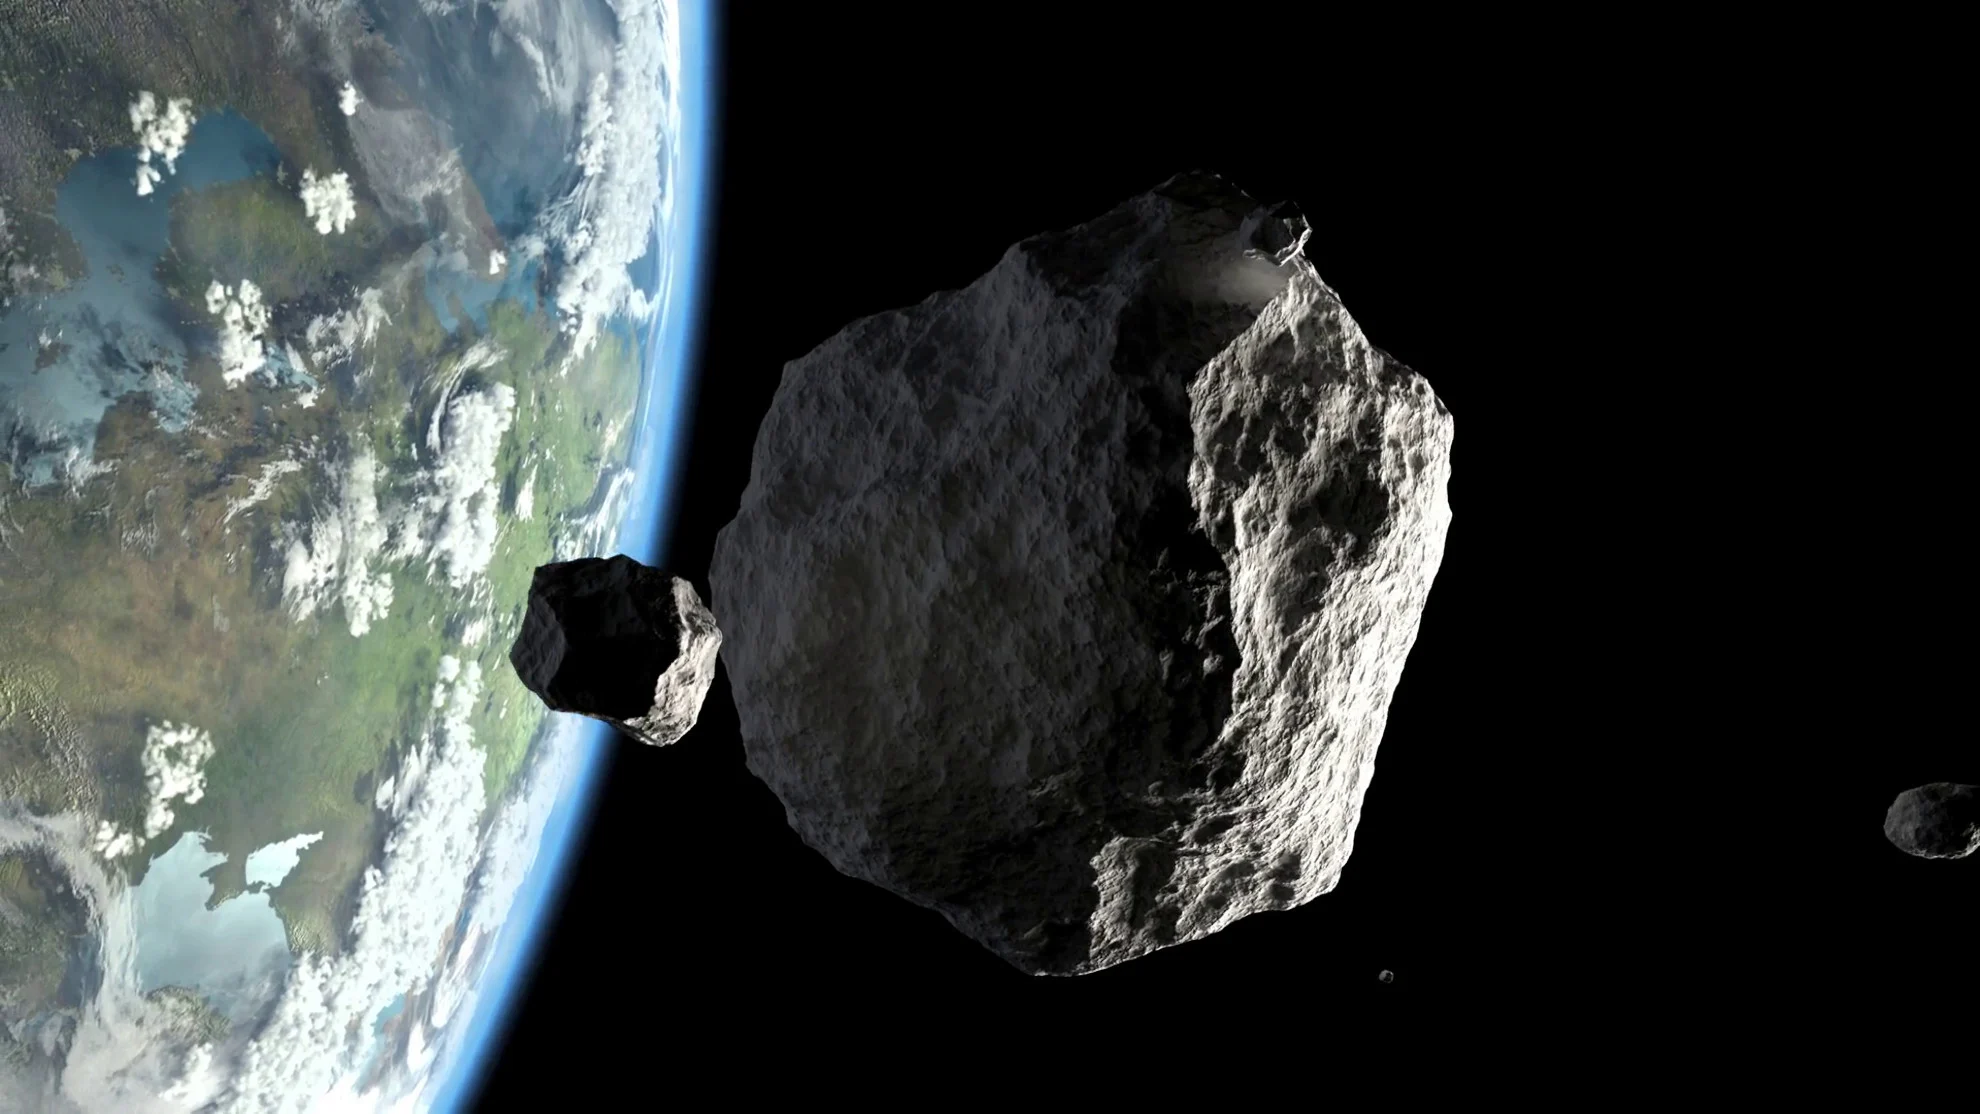 Good news! Earth is safe from planet-killer asteroids for the next 1000 years